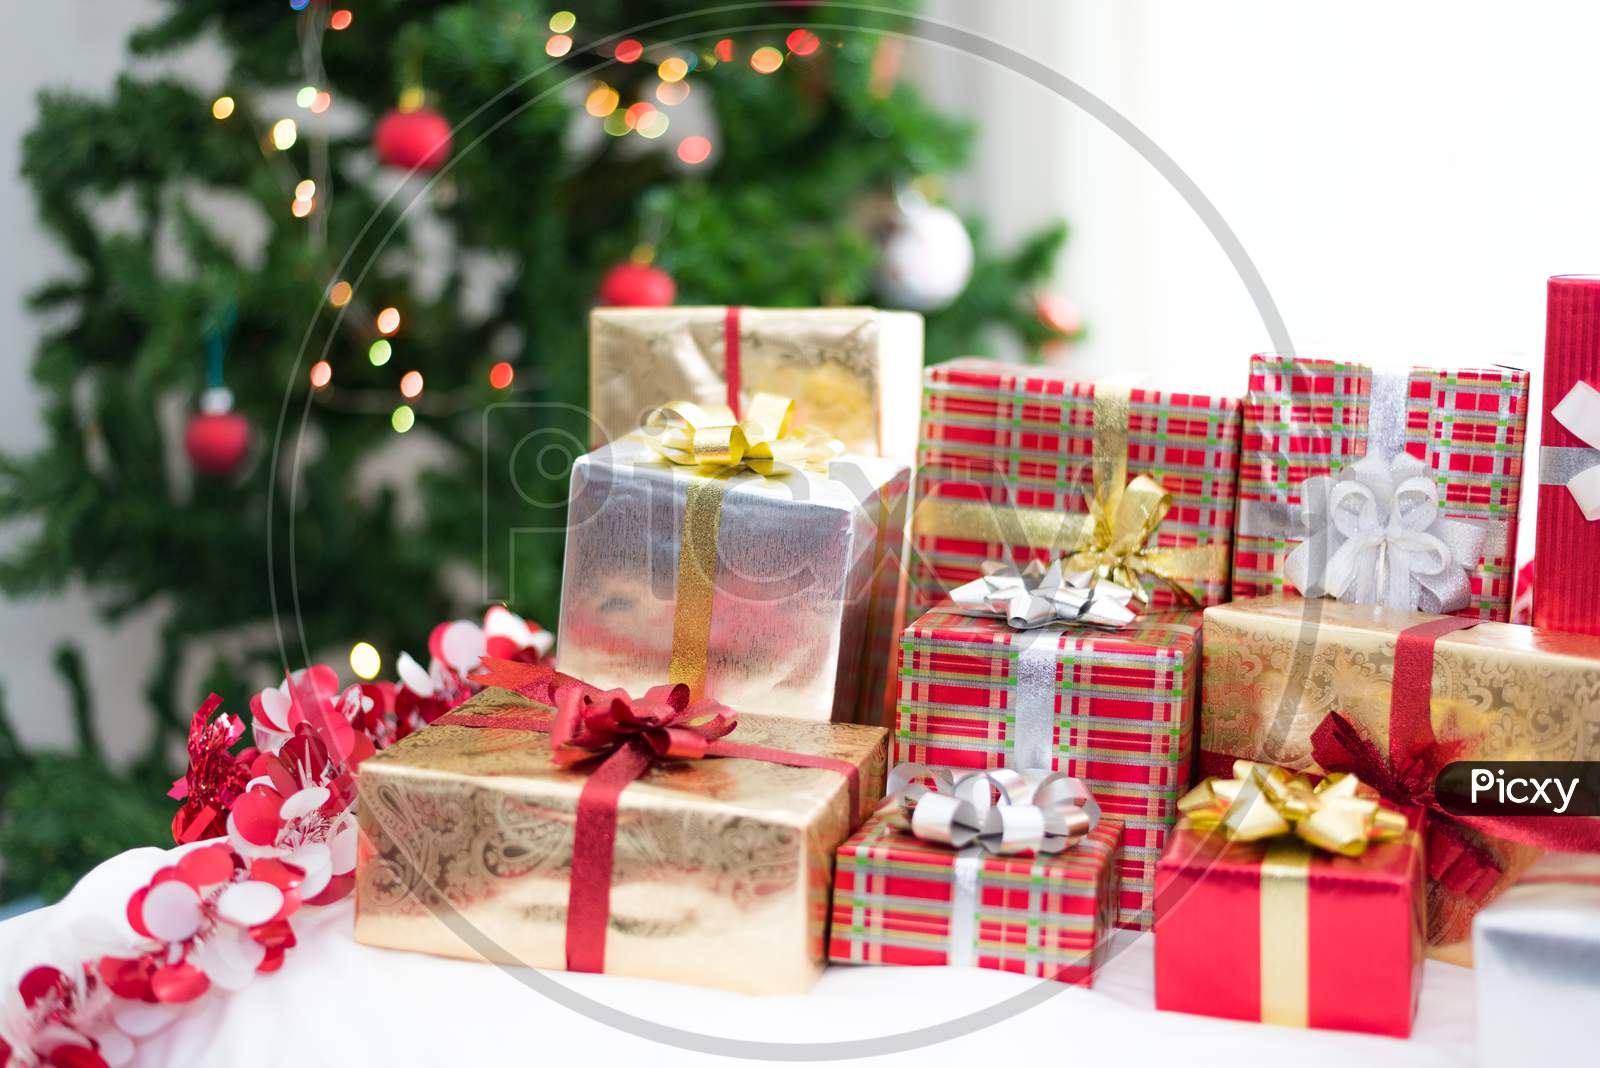 Gift Box With Christmas Tree Background For Surprise Children In New Year Or Xmas Party Festival. Relaxing Holiday And Object Concept. Christmas Party Event And Happy New Year Theme. Decorate Property